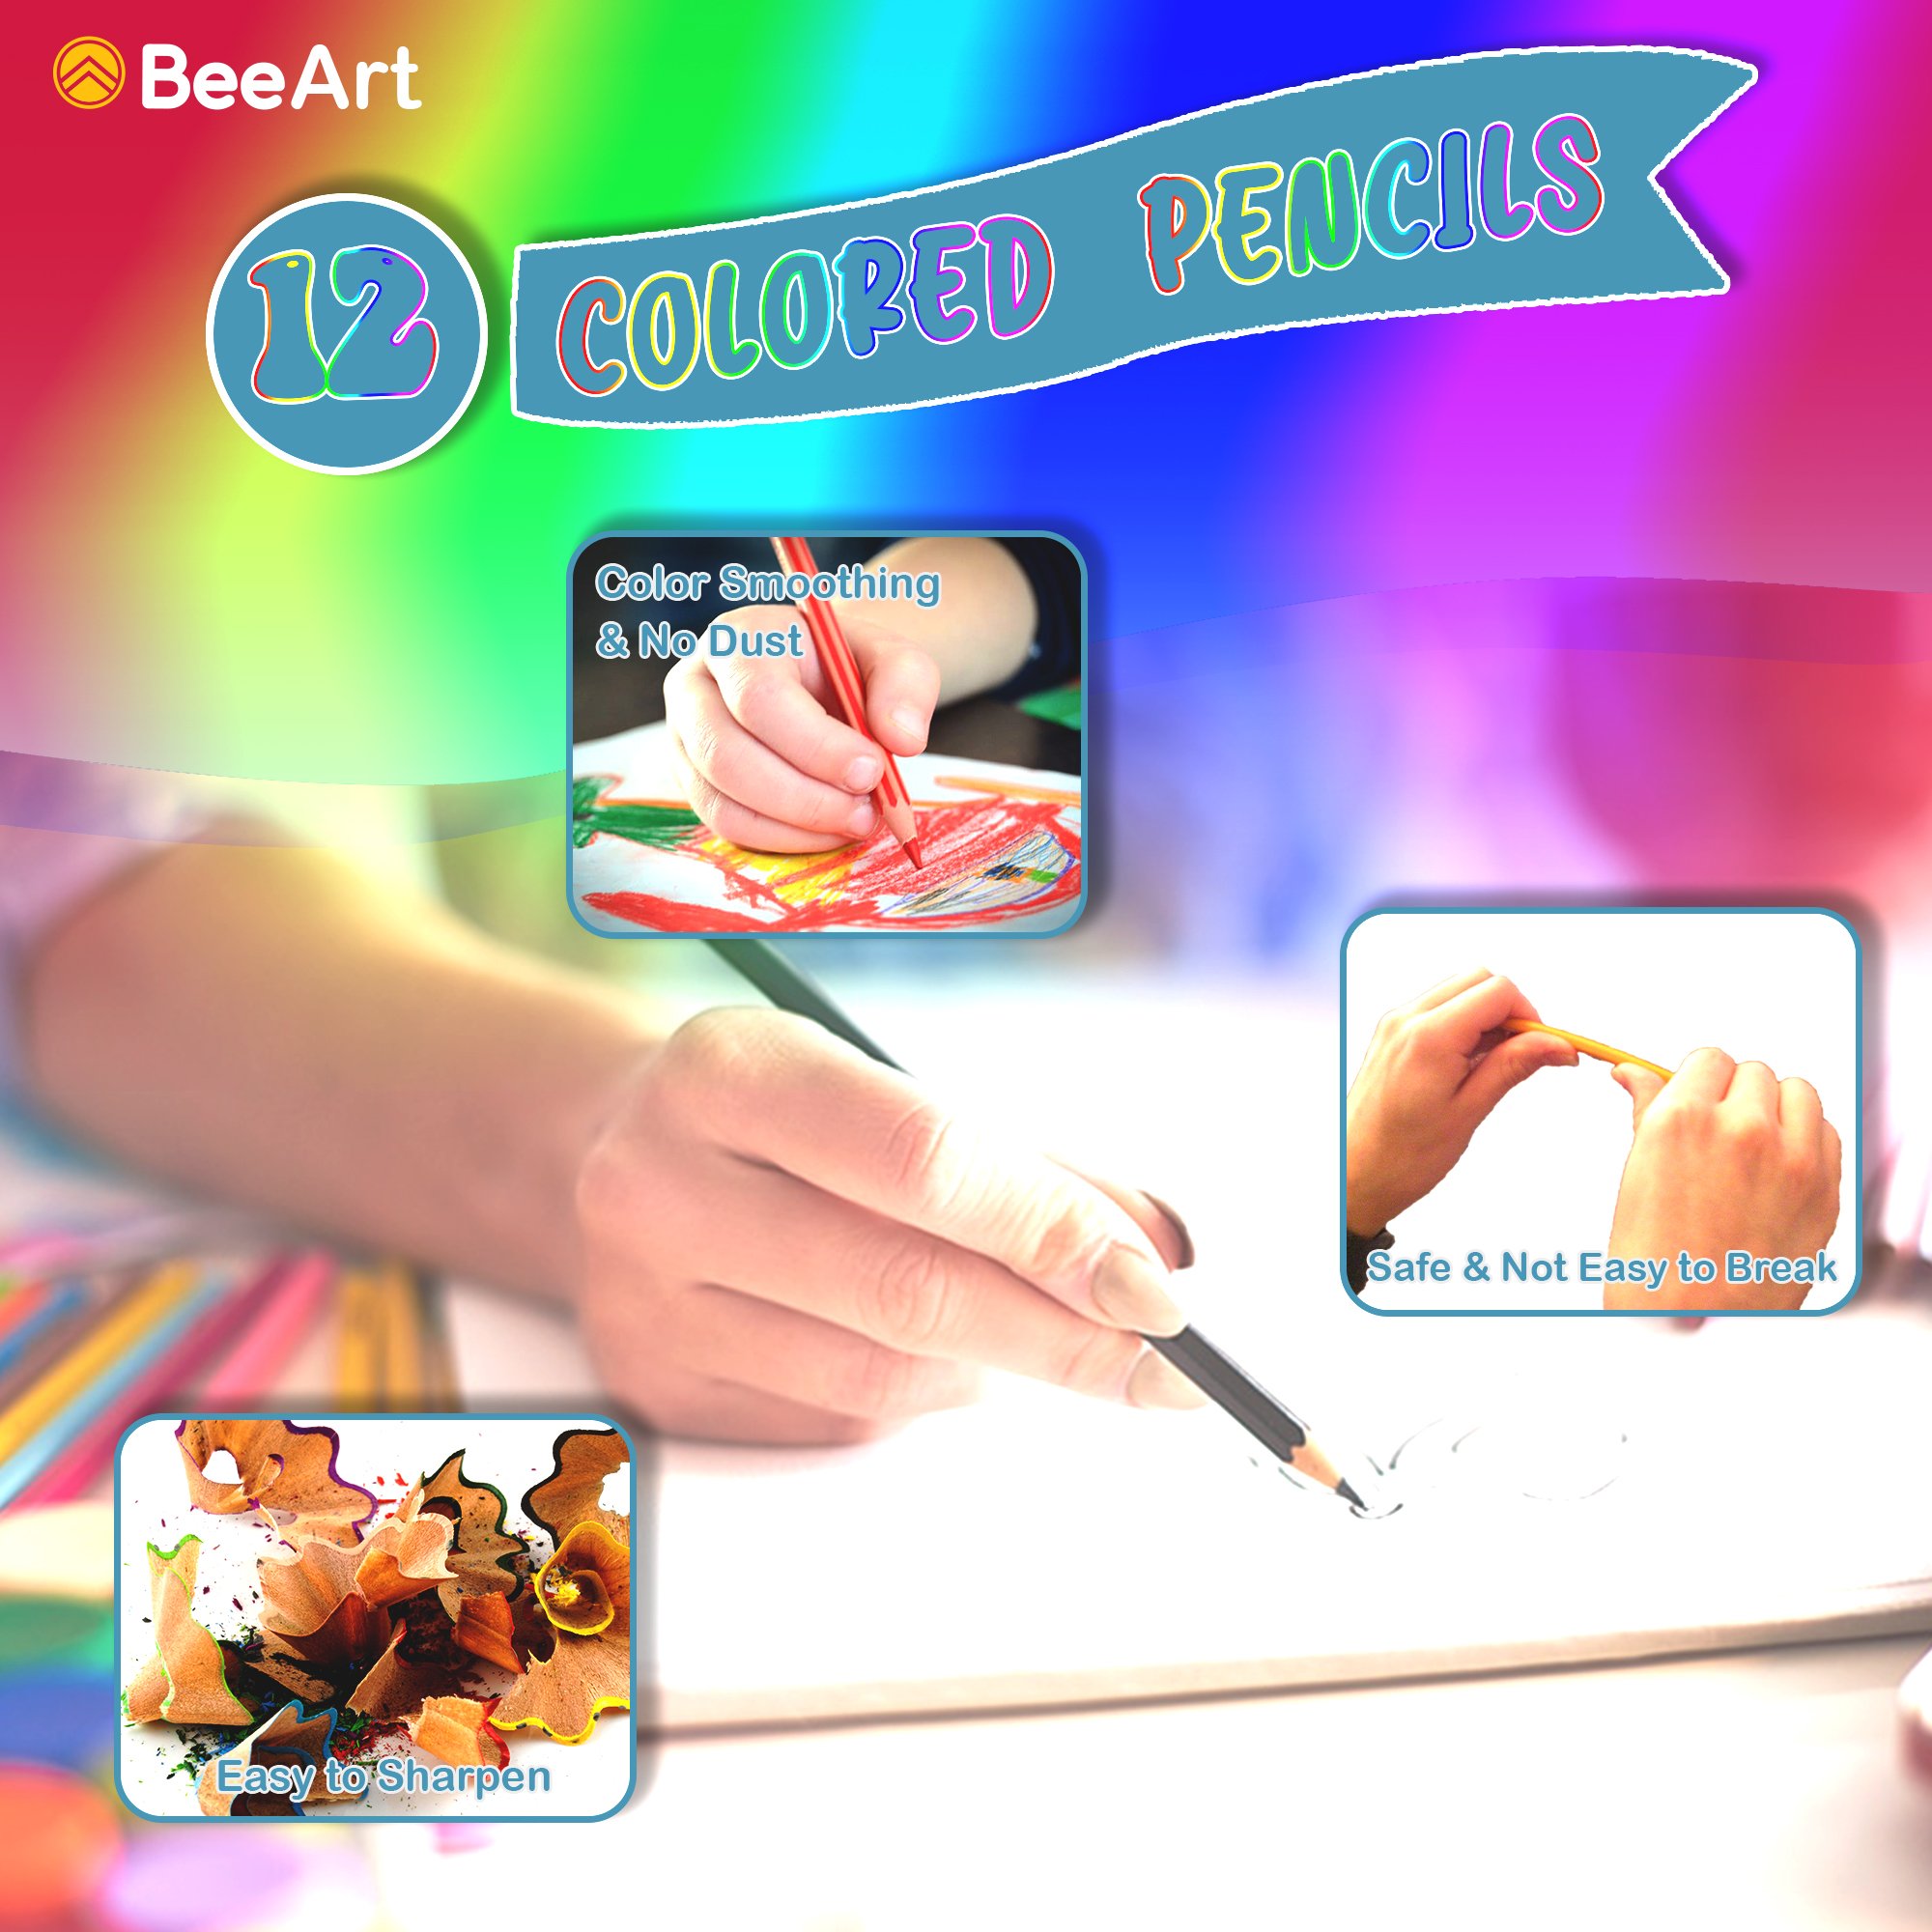 BeeArt Erase Colored Pencils, Plastic, Multicolor coloring for adult and kids, Pack of 12